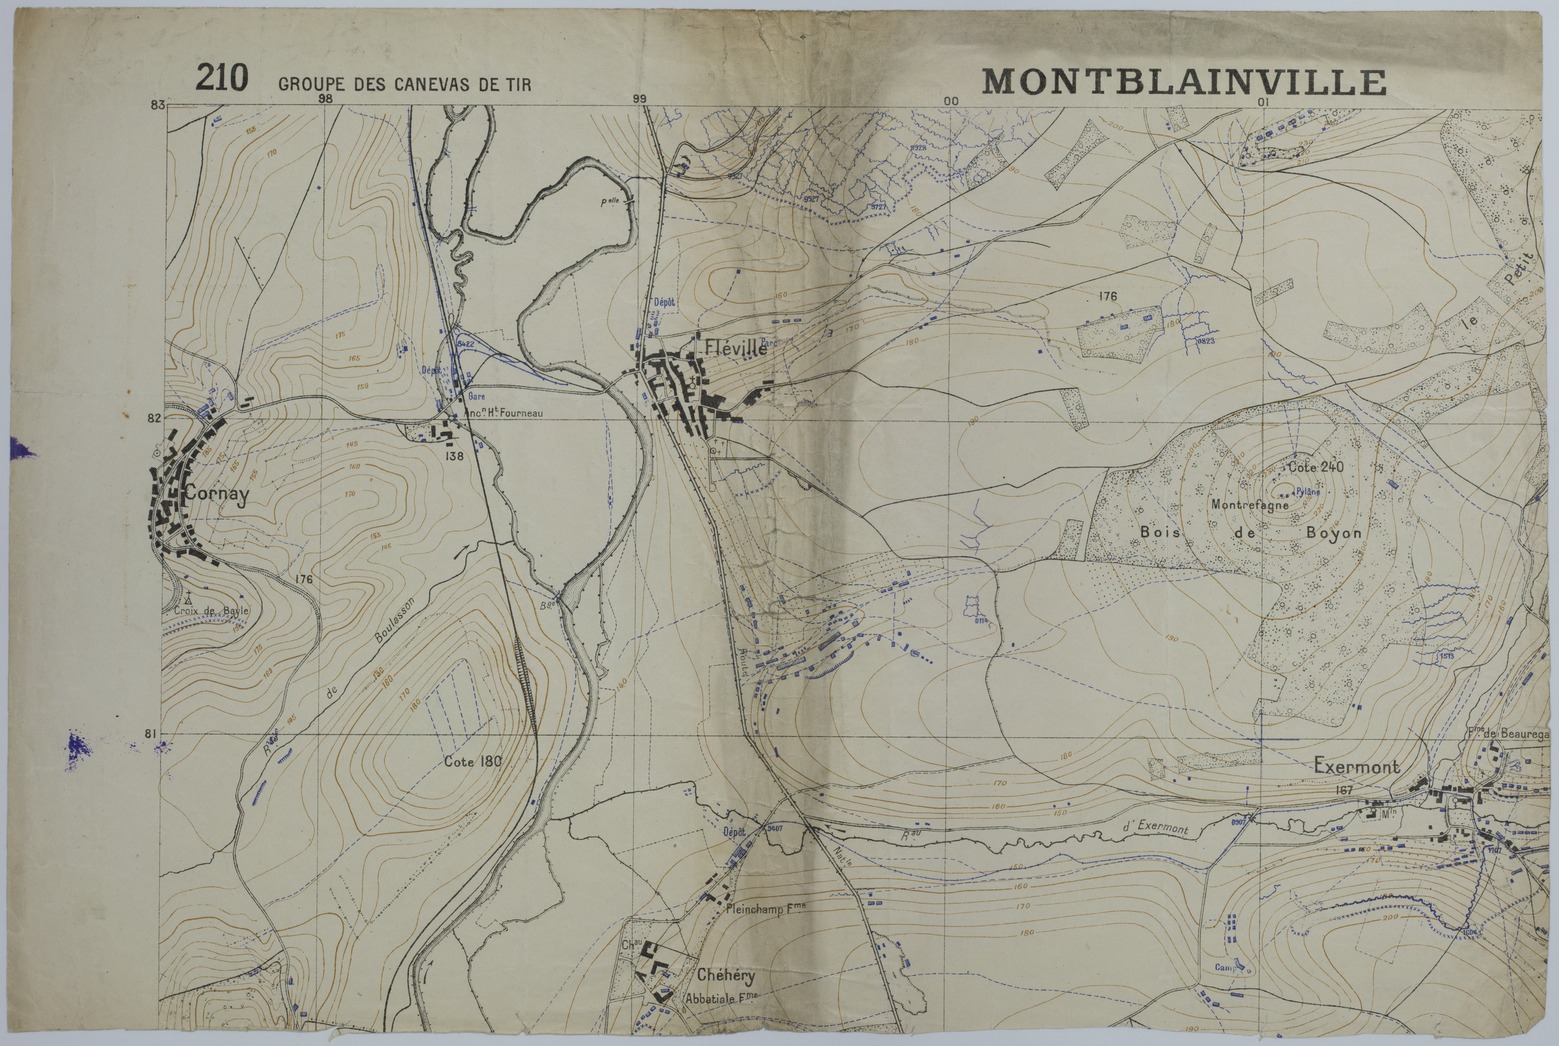 Map of Trench Systems and Barracks